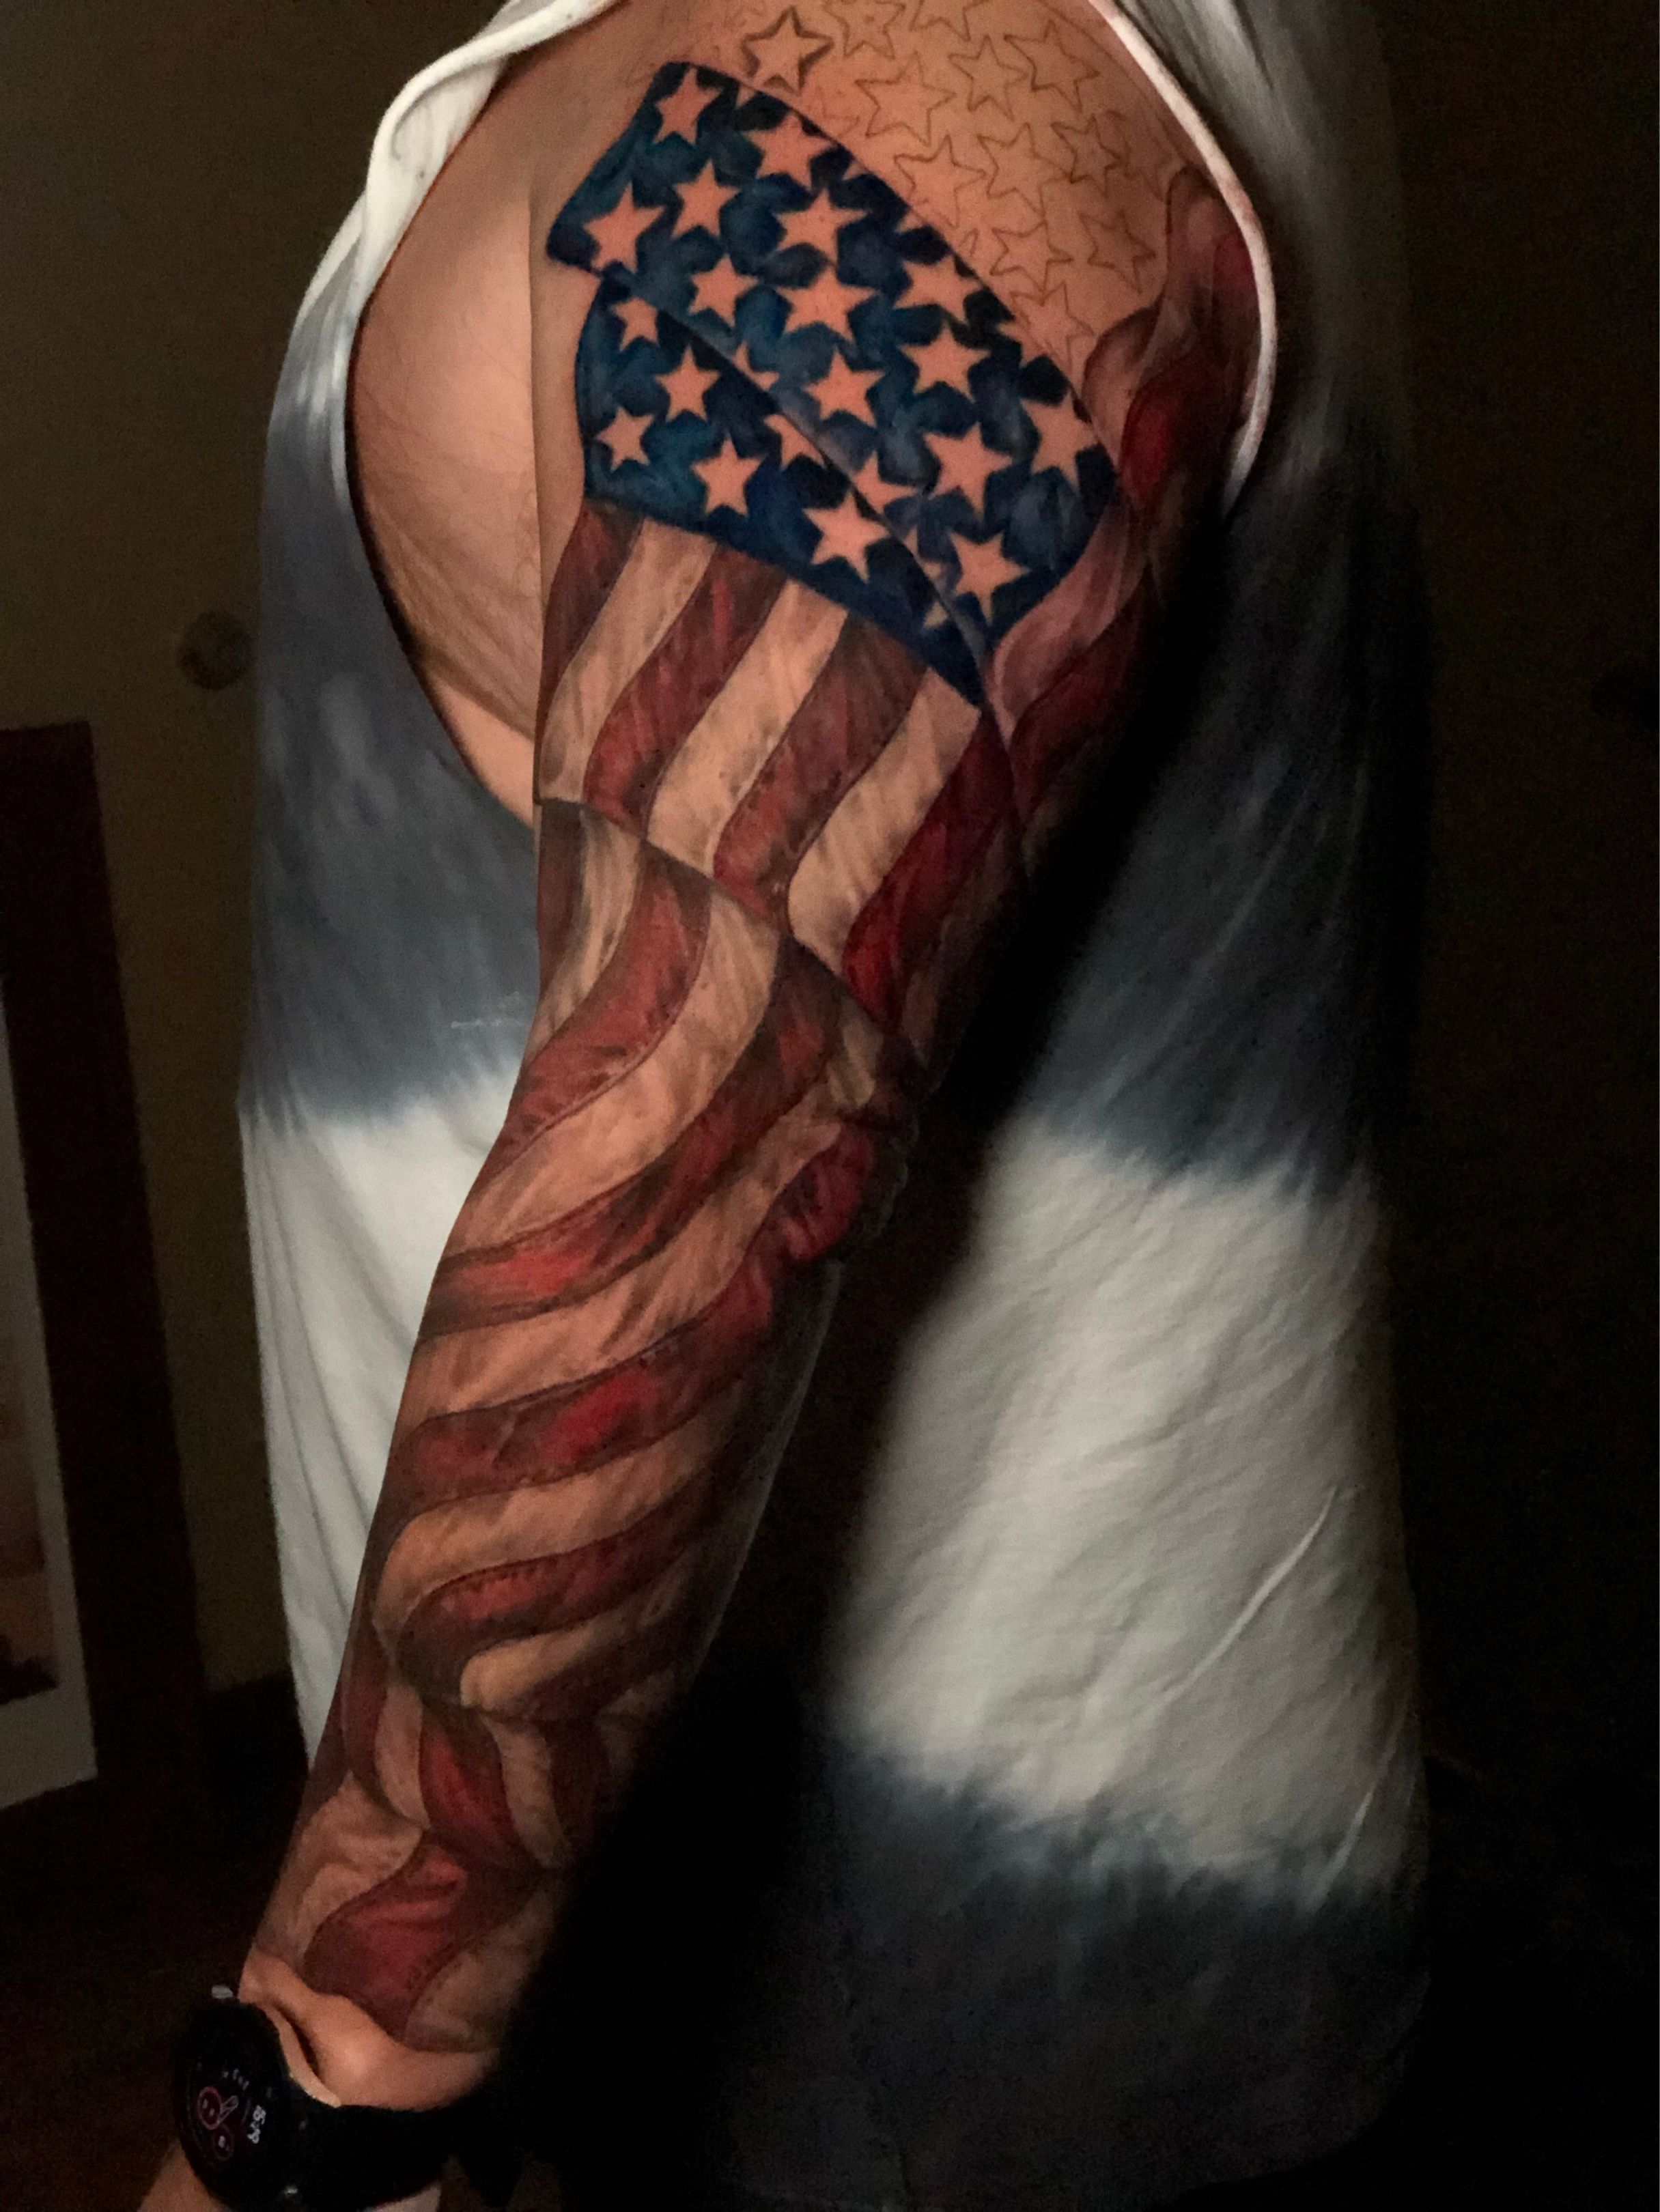 Warrior Ink project tells veterans' stories expressed through tattoos